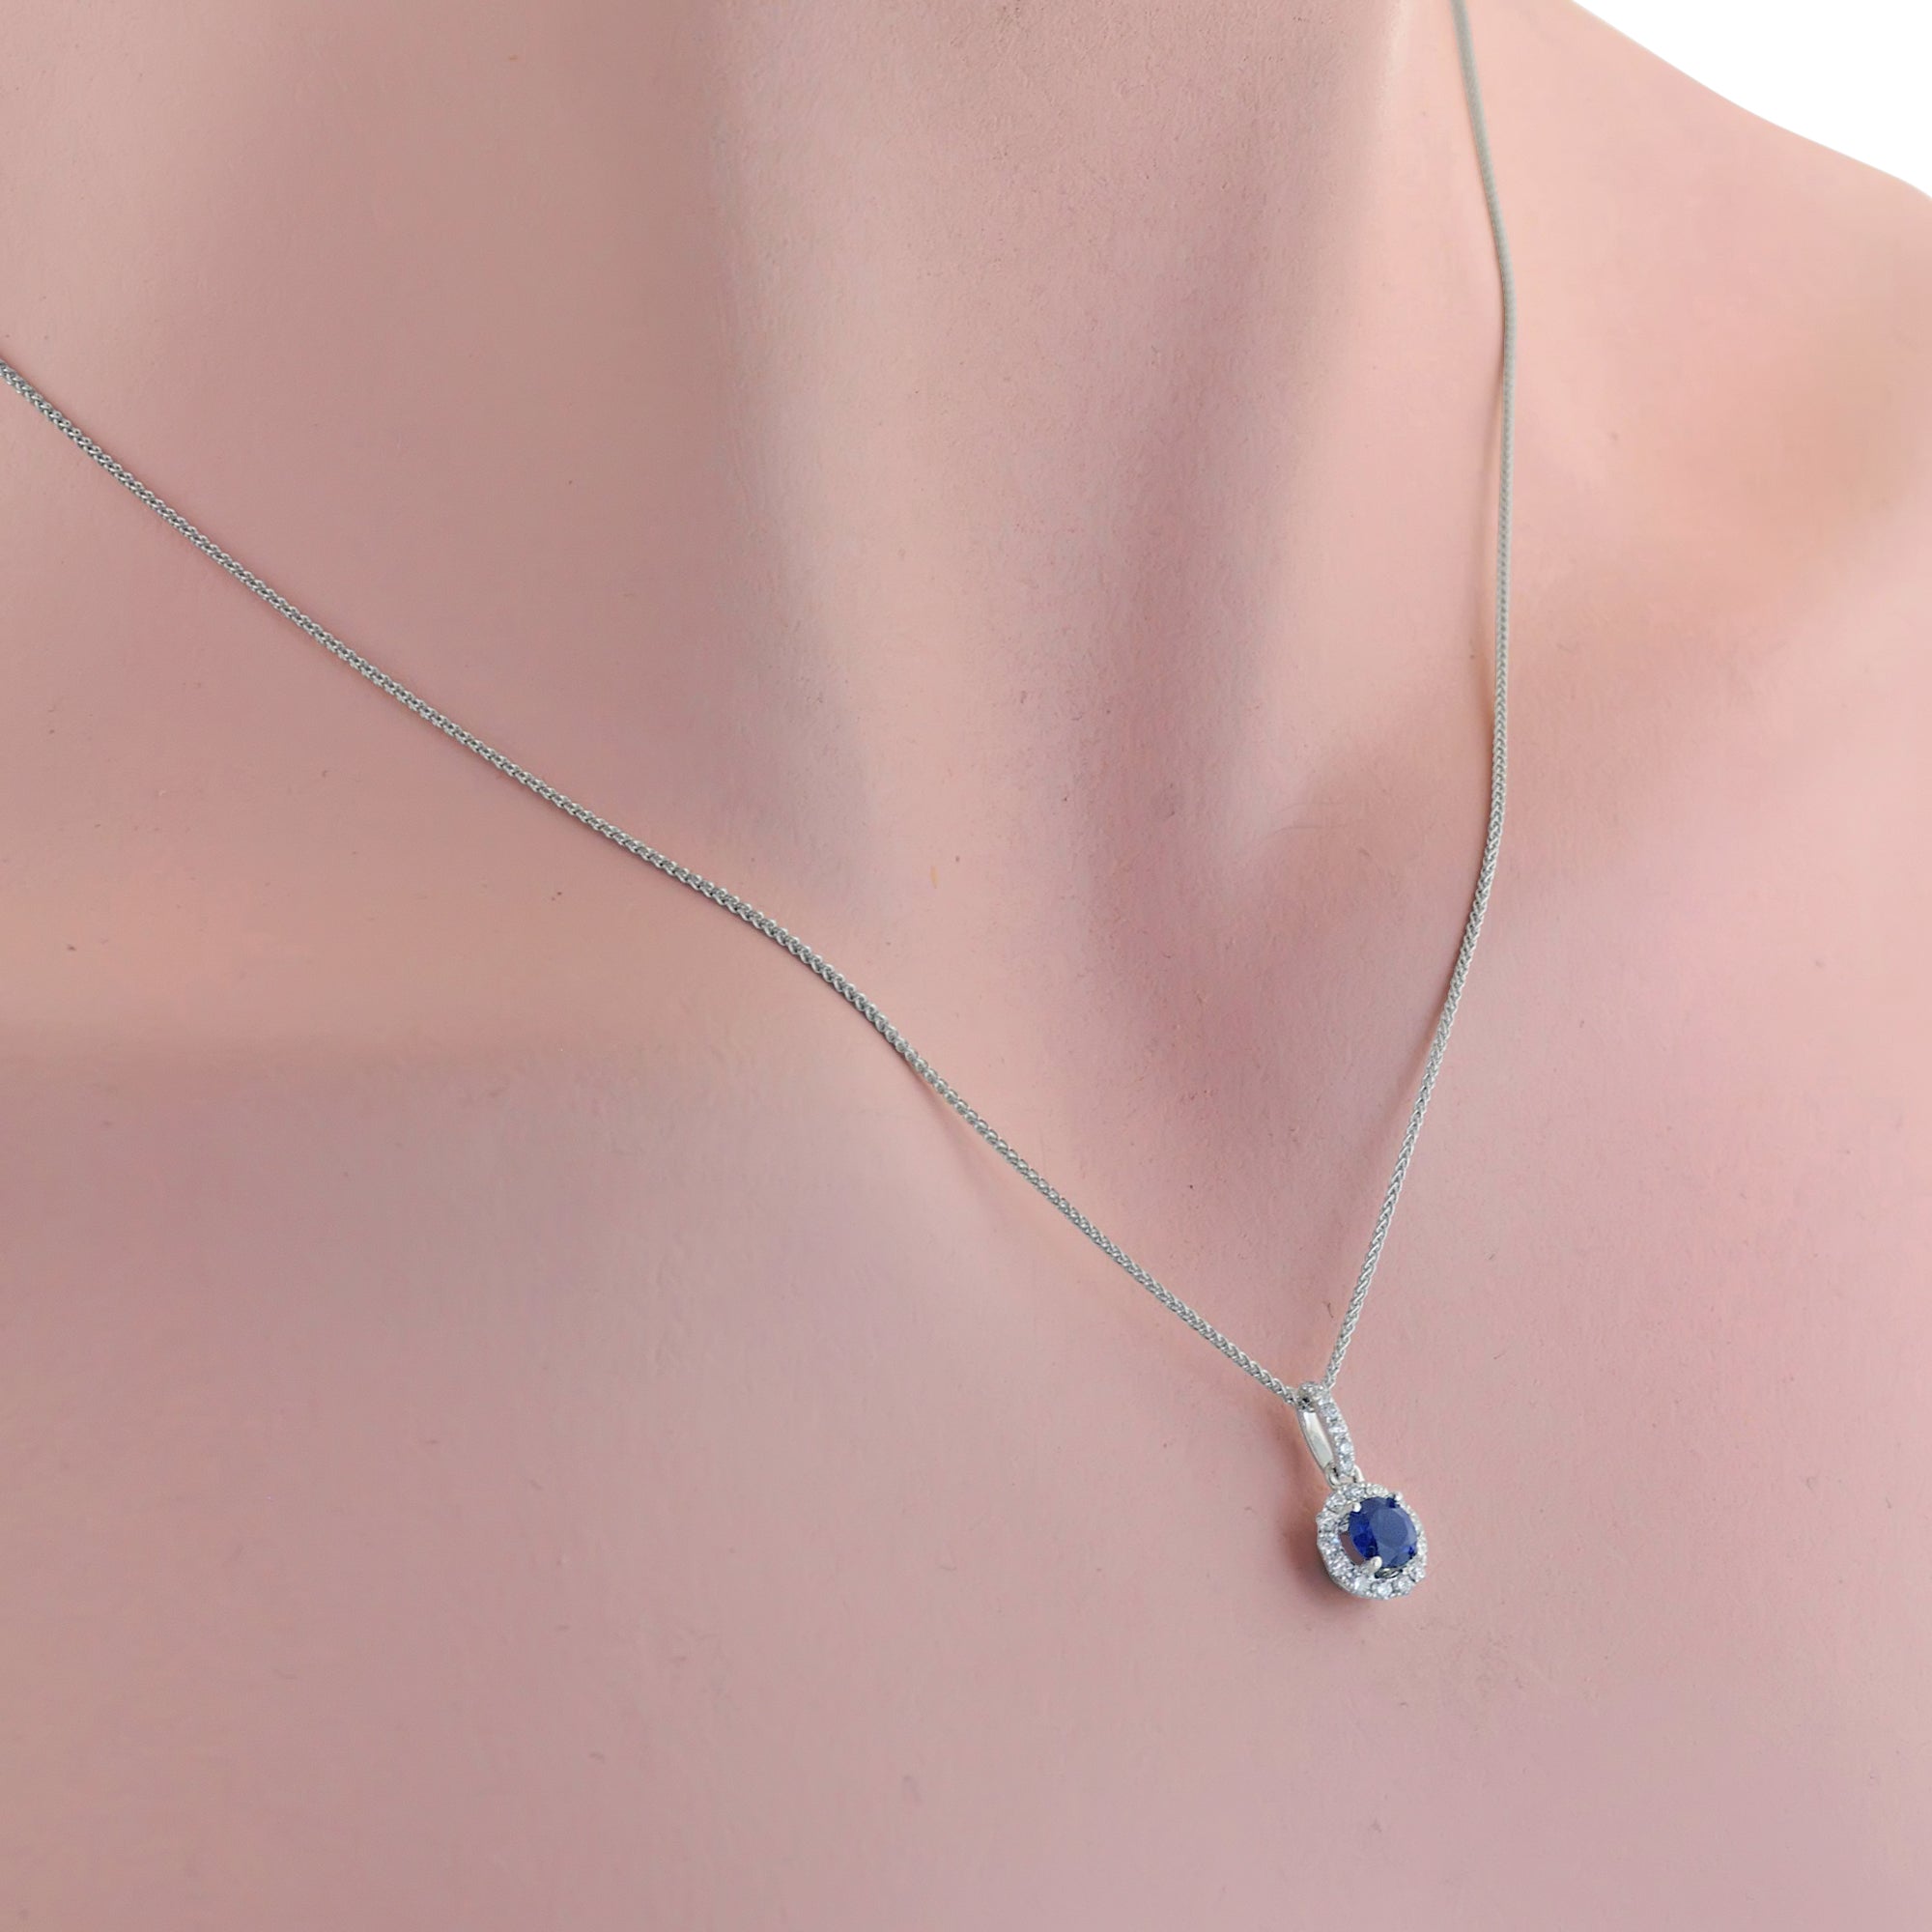 Sapphire Halo Necklace in 14kt White Gold with Diamonds (1/7ct tw)